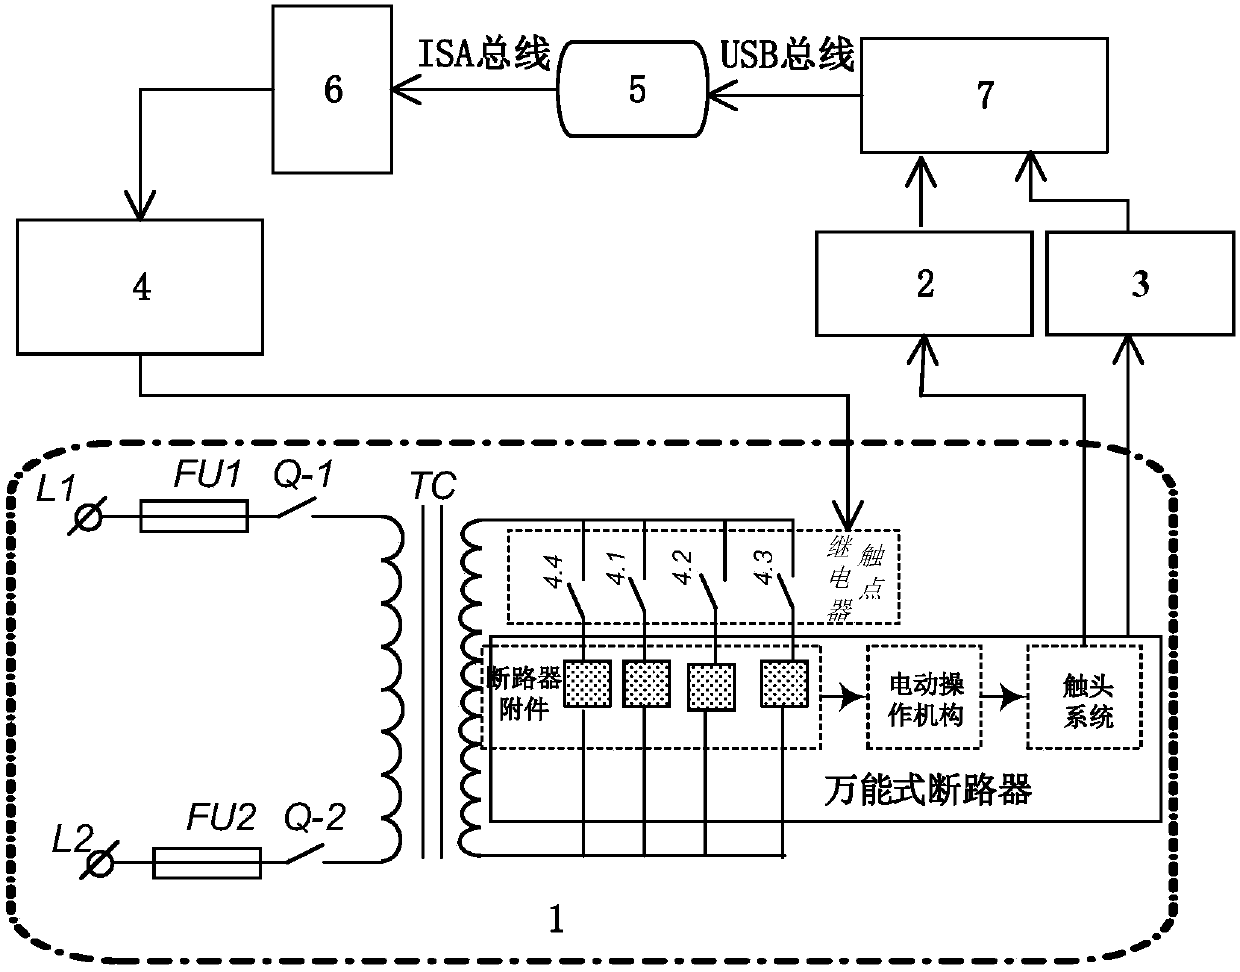 Universal circuit breaker mechanical fault diagnosis method based on feature fusion of vibration and sound signals